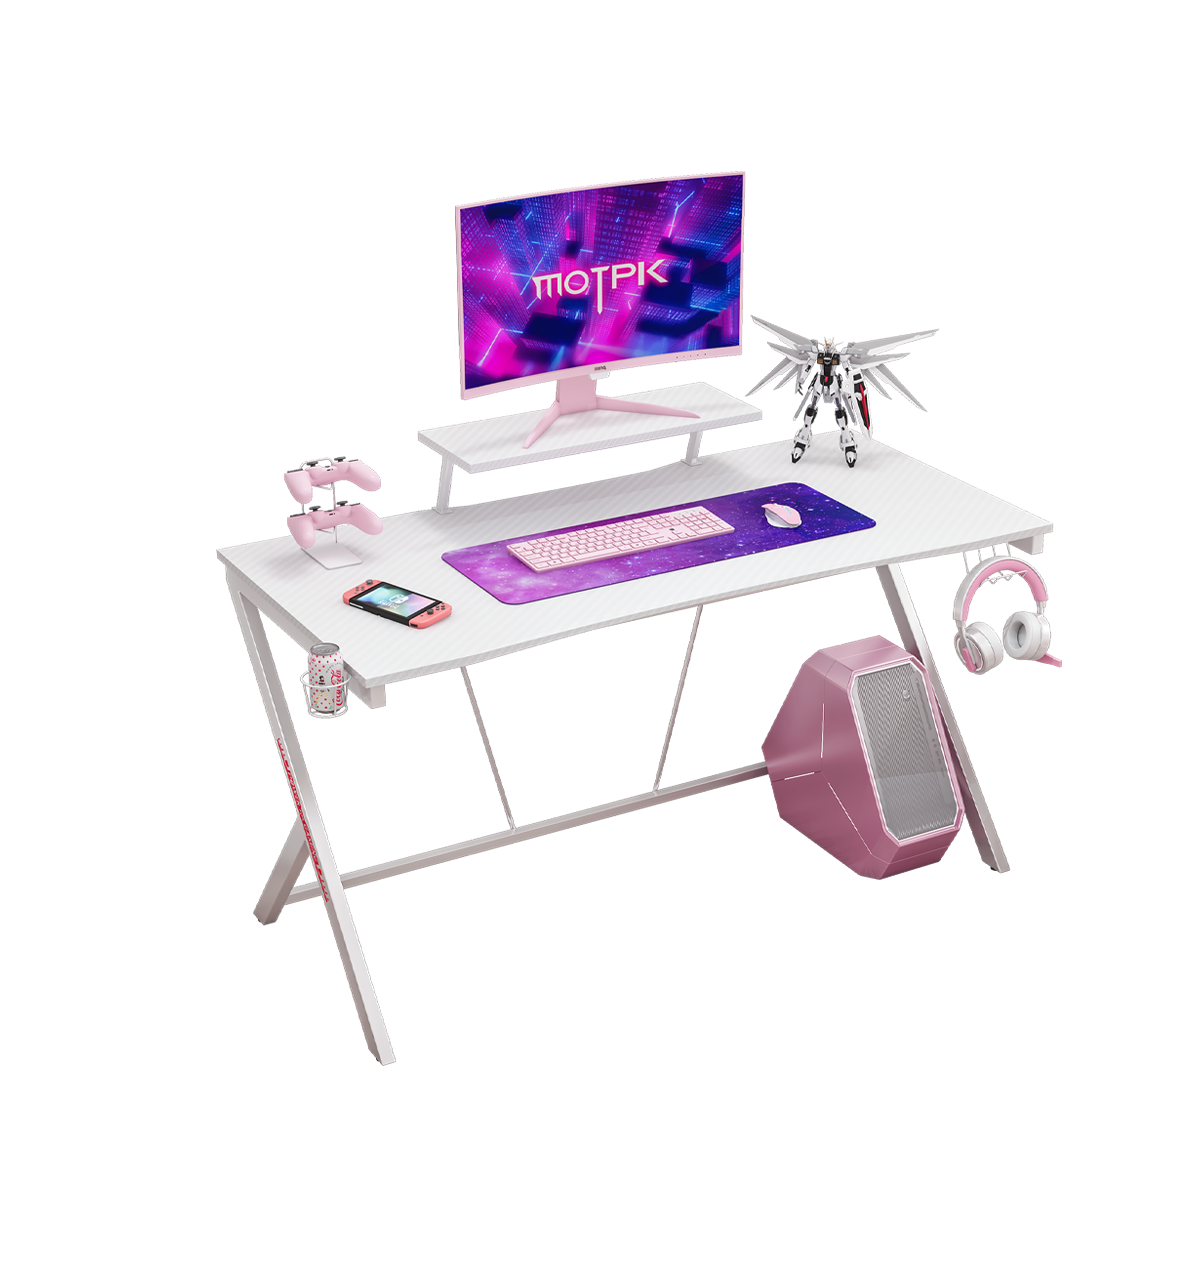 40 Inch Gaming Desk with Monitor Shelf-White